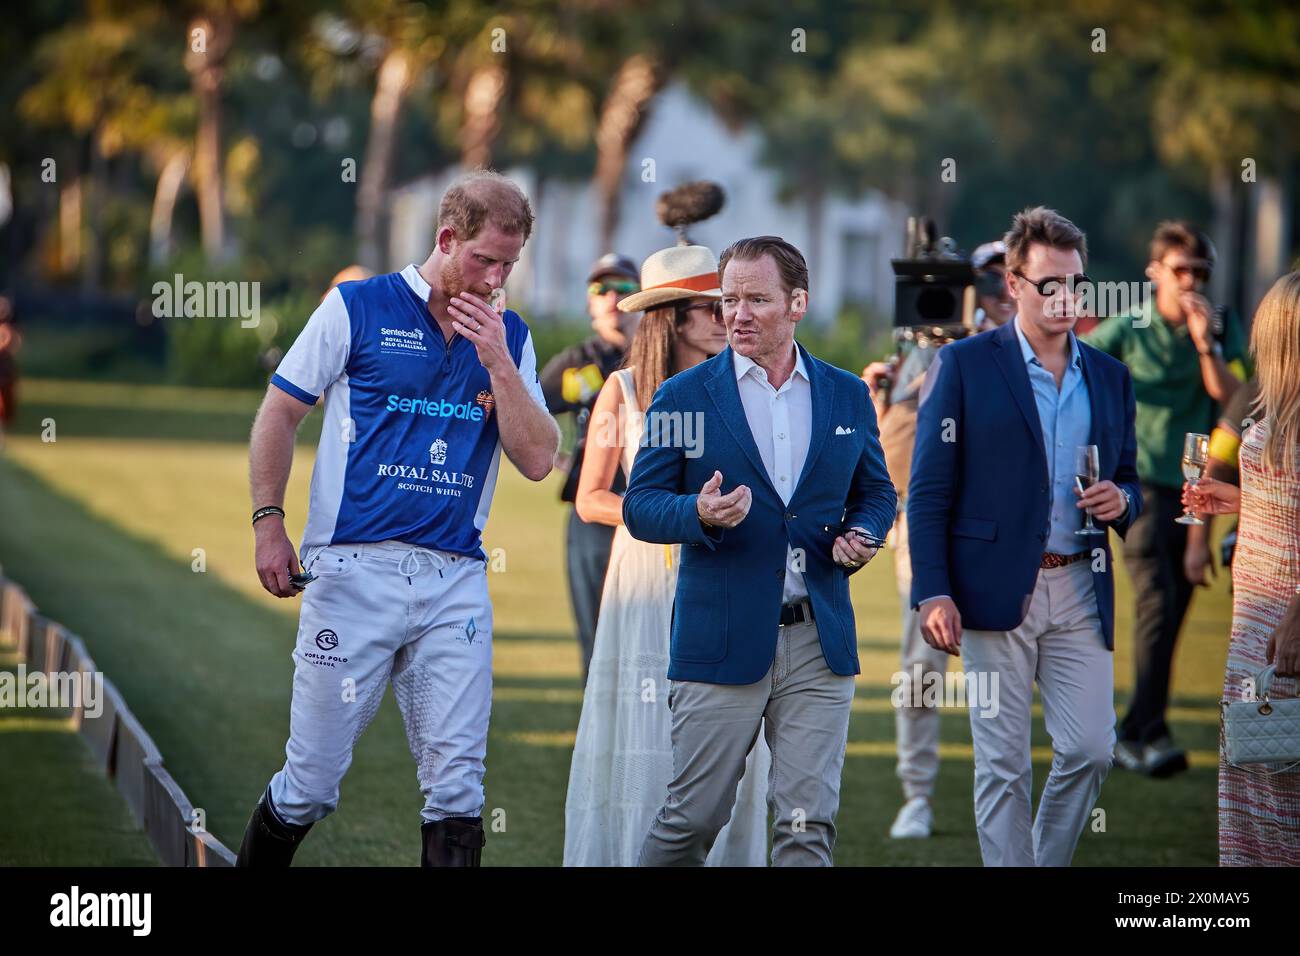 Wellington, Florida, USA. 12th April 2024. Prince Harry, The Duke of Sussex, Co-Founding Patron of Sentebale, play on the Royal Salute Sentebale Team, against the Grand Champions Team captained by his long-time friend and the charity’s ambassador, Argentine polo player Nacho Figueras and the Maseru Team. Credit: Yaroslav Sabitov/YES Market Media/Alamy Live News. Stock Photo